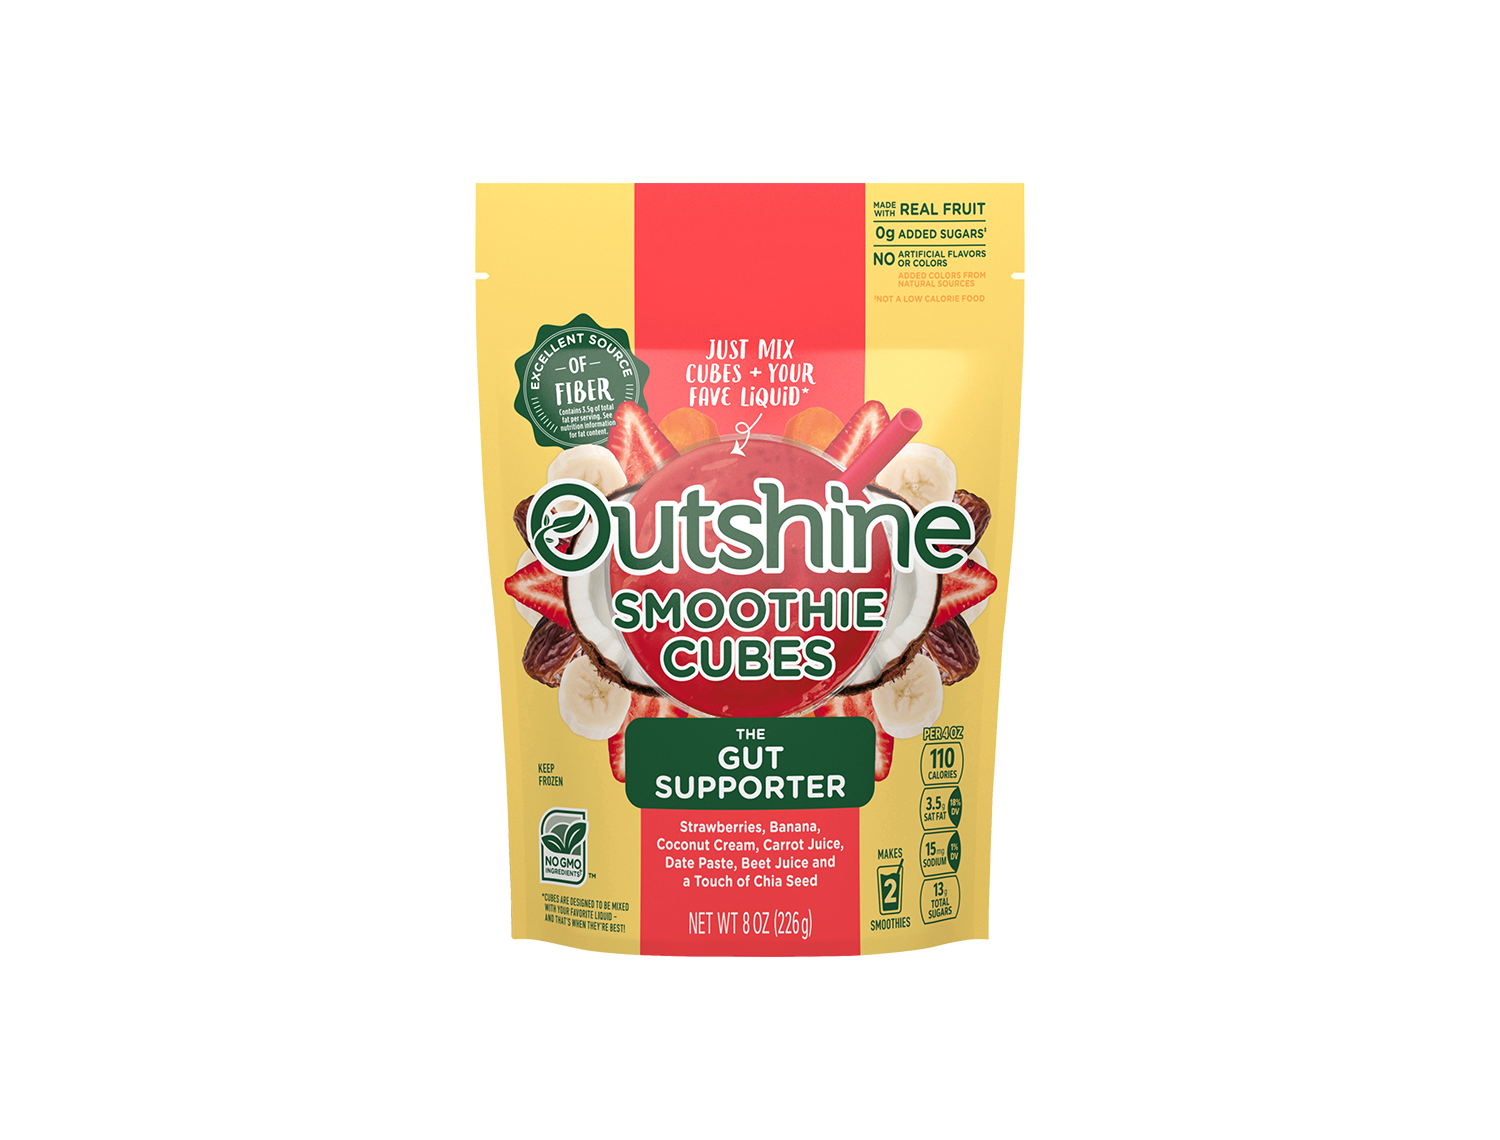 http://www.icecream.com/content/dam/dreyersgrandicecreaminc/us/en/outshine/products/snacks-and-bites/Outshine-The-Gut-Supporter-Smoothie-Cubes-Snacks-And-Bites.png